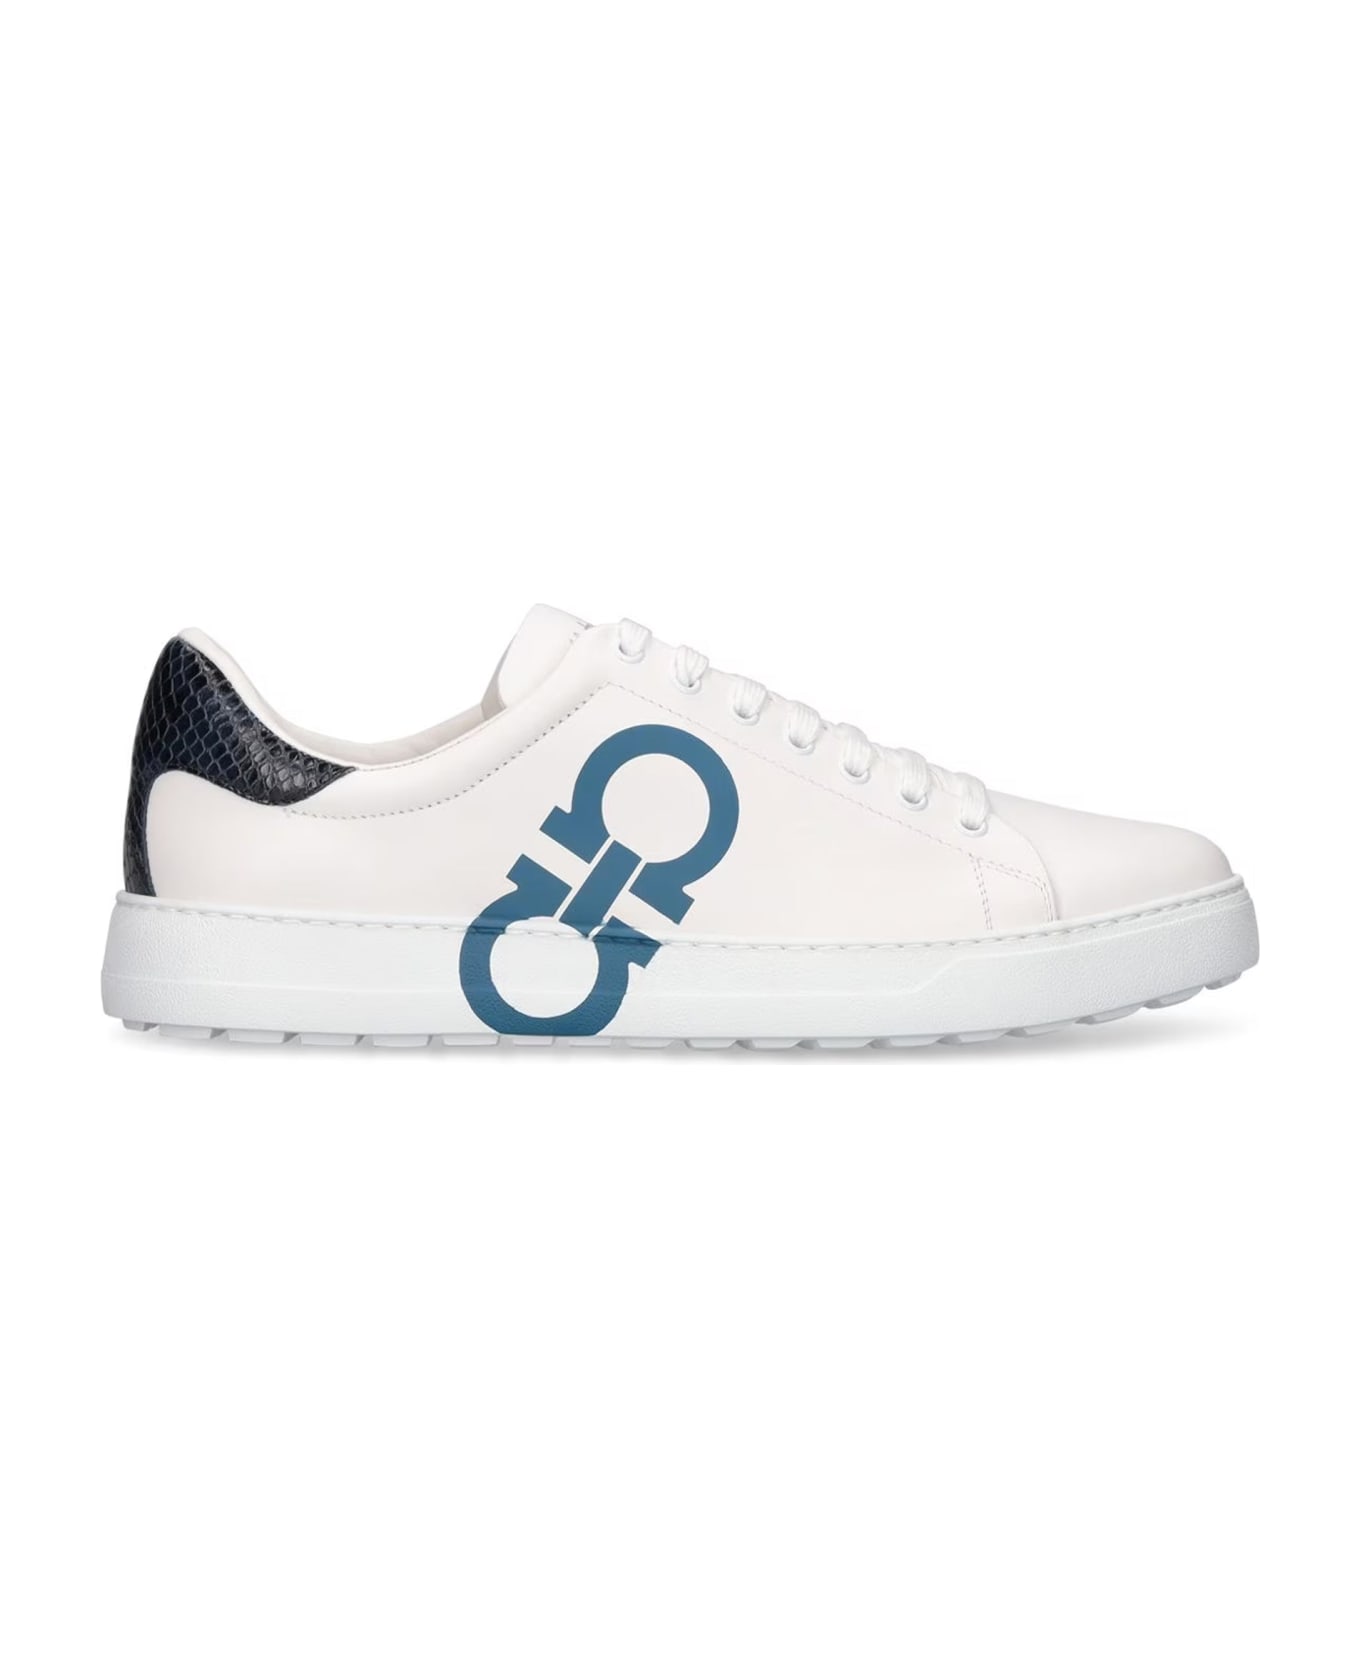 Ferragamo Number Leather Sneakers - White スニーカー